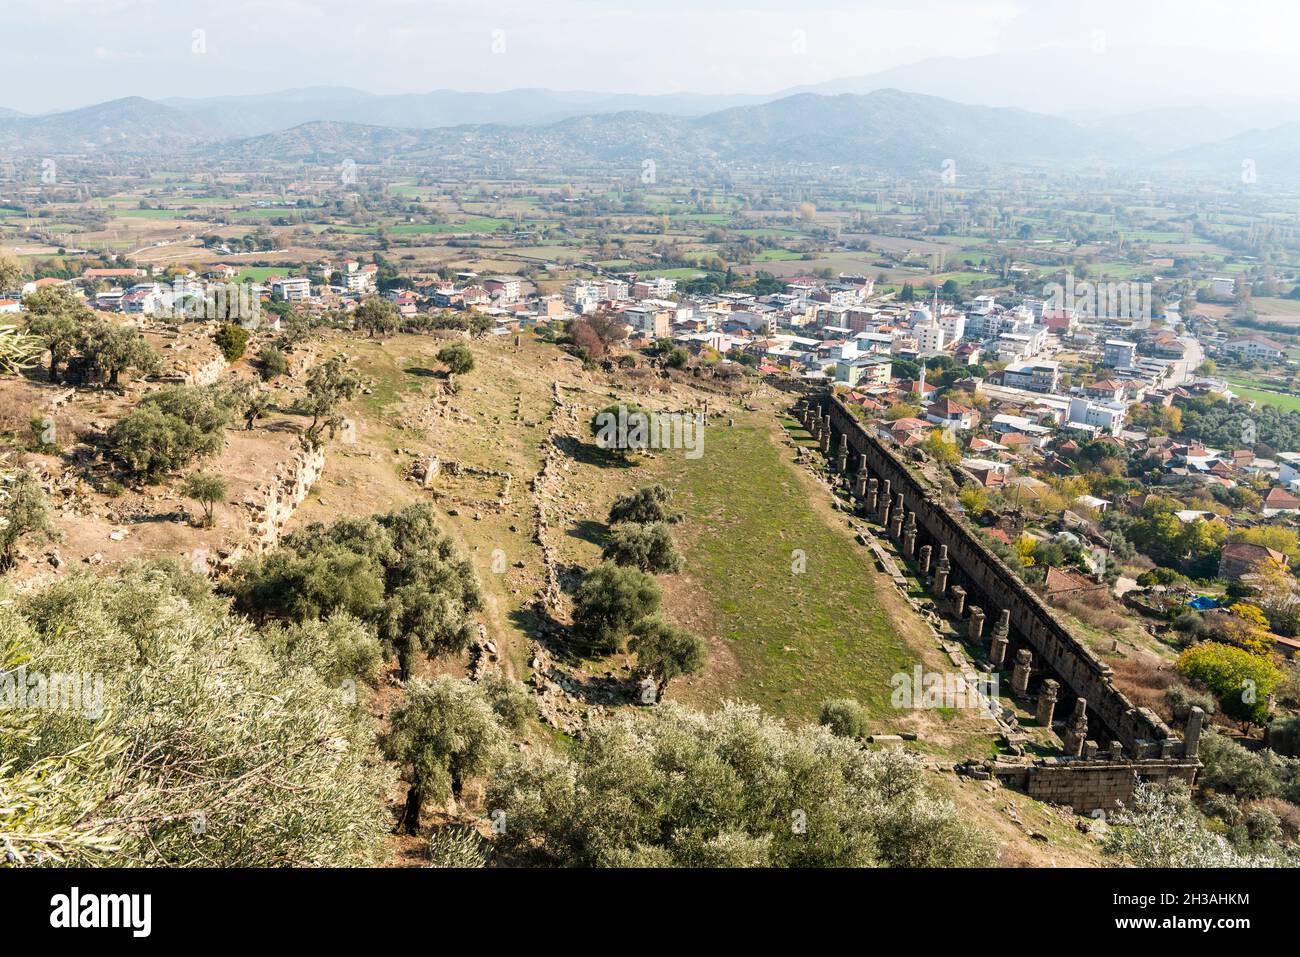 View over Alinda ancient site in Aydin province of Turkey, with Karpuzlu township in the background. Stock Photo